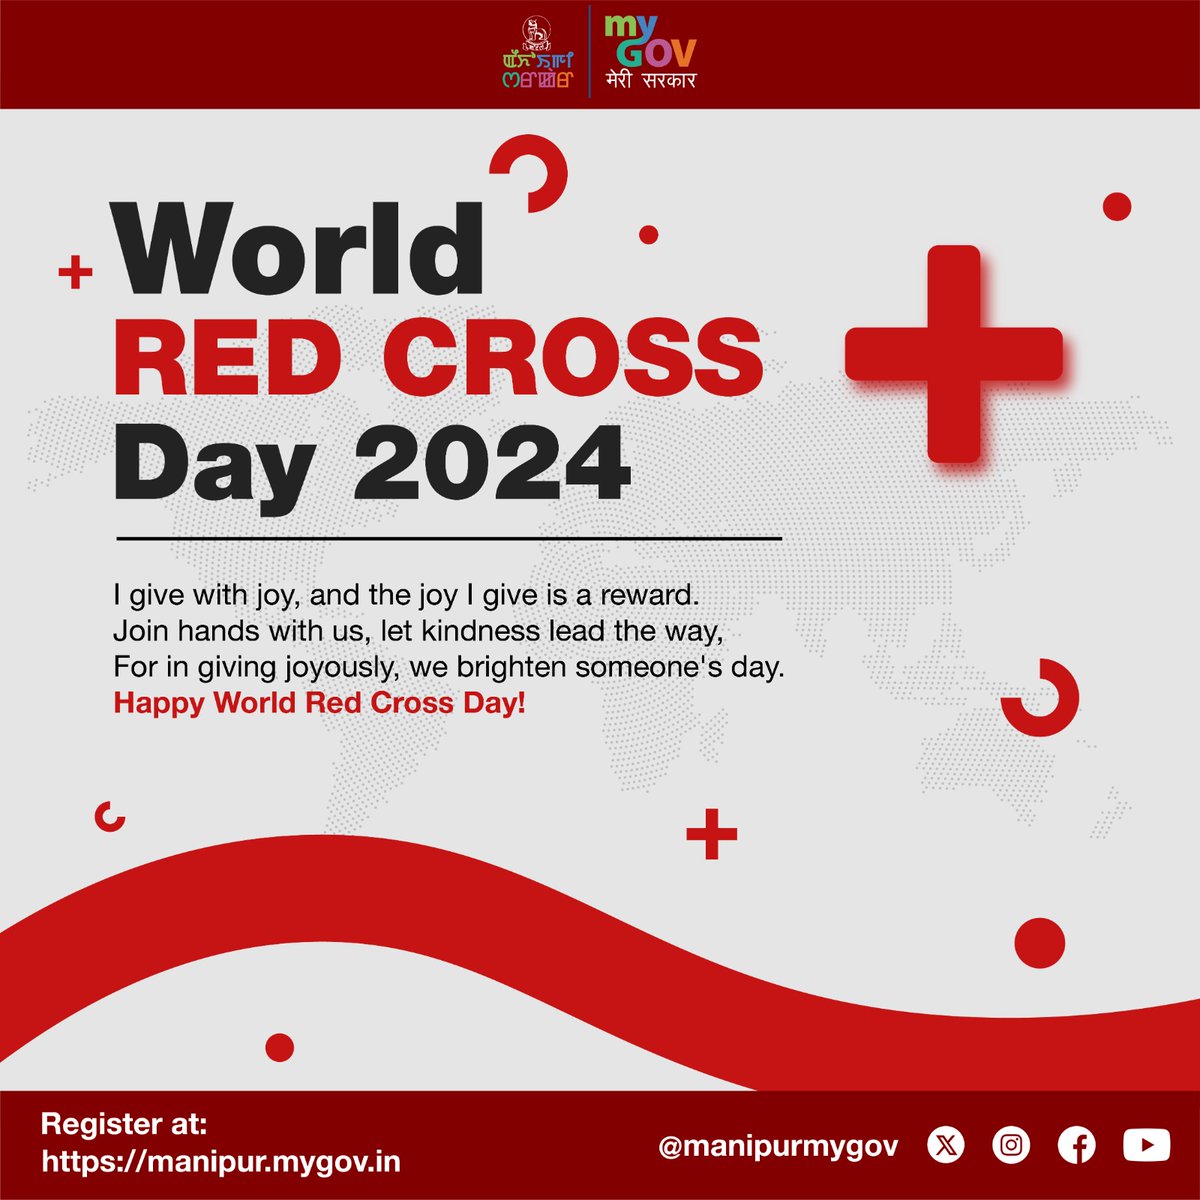 Happy World Red Cross Day! Today, let's salute the spirit of compassion, unity, and service that the Red Cross embodies. In times of crisis and calm, the Red Cross stands as a beacon of hope, reminding us that humanity knows no bounds. Let's join hands to support their mission.